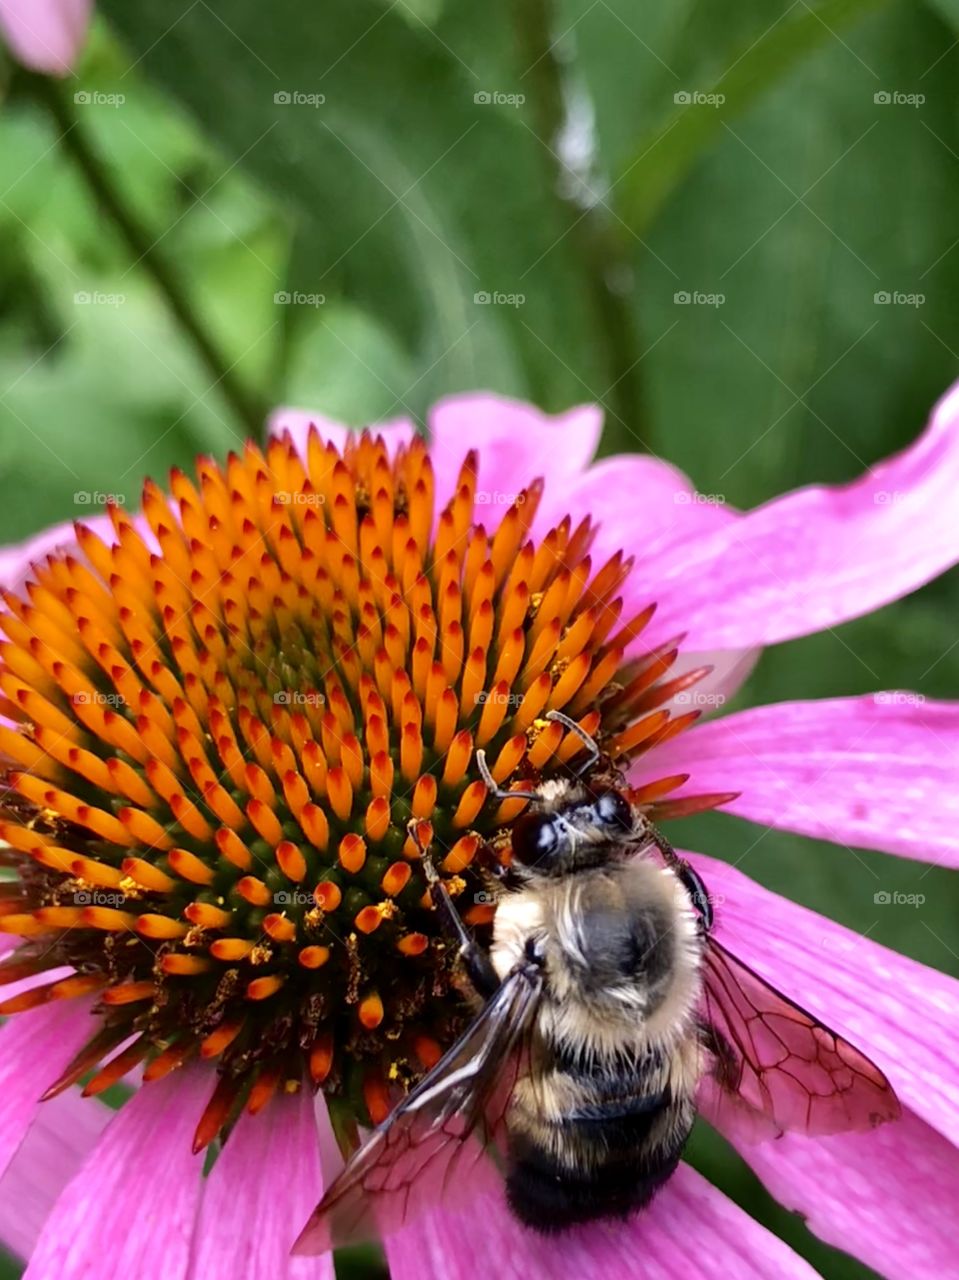 Macro image of a fuzzy bee on a pink cone flower (Echinacea flower) siphoning nectar or pollen from the head of the flower 